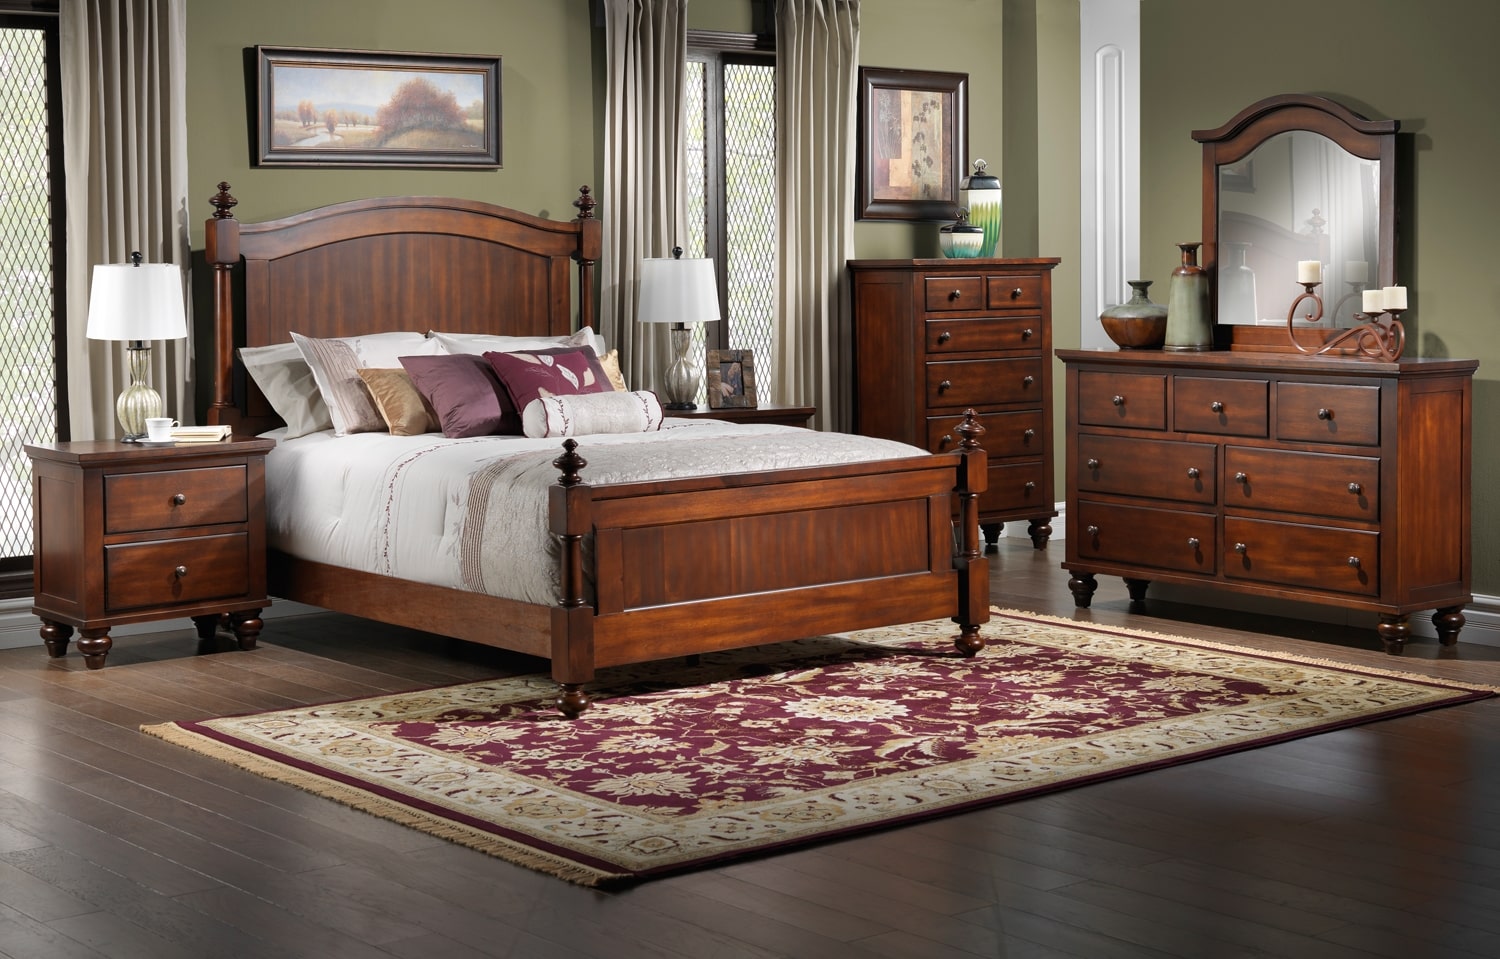 Palisade Bedroom Collection Leon S Palisade Bedroom Collection